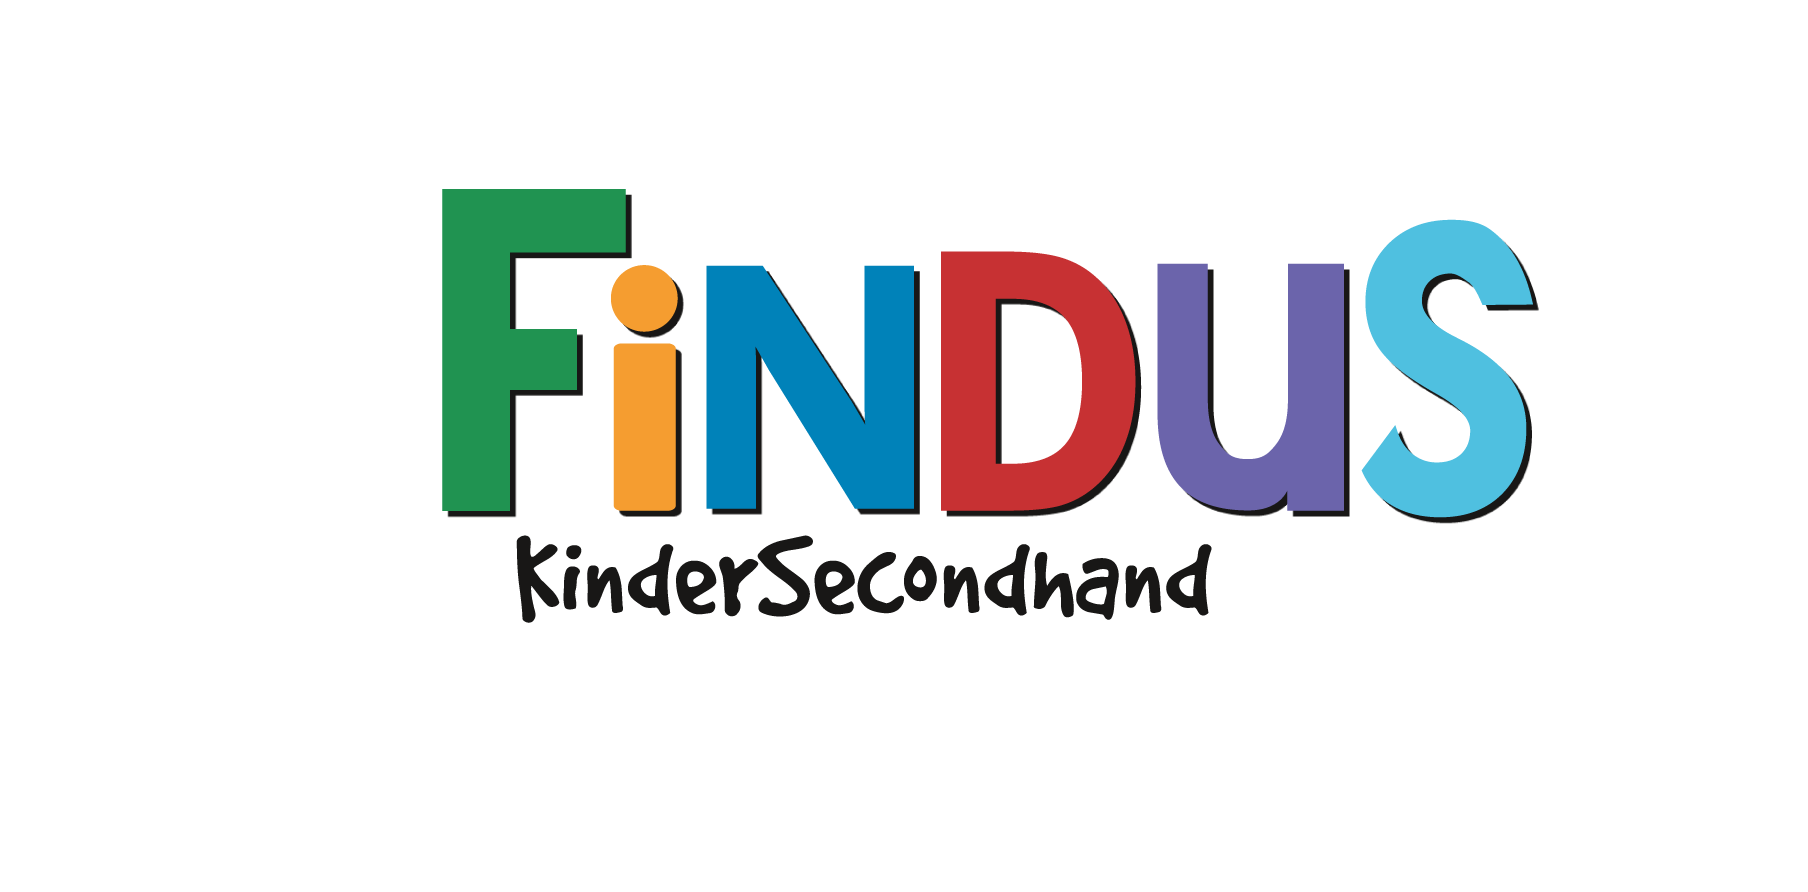 FiNDUS – first & secondhand for kids